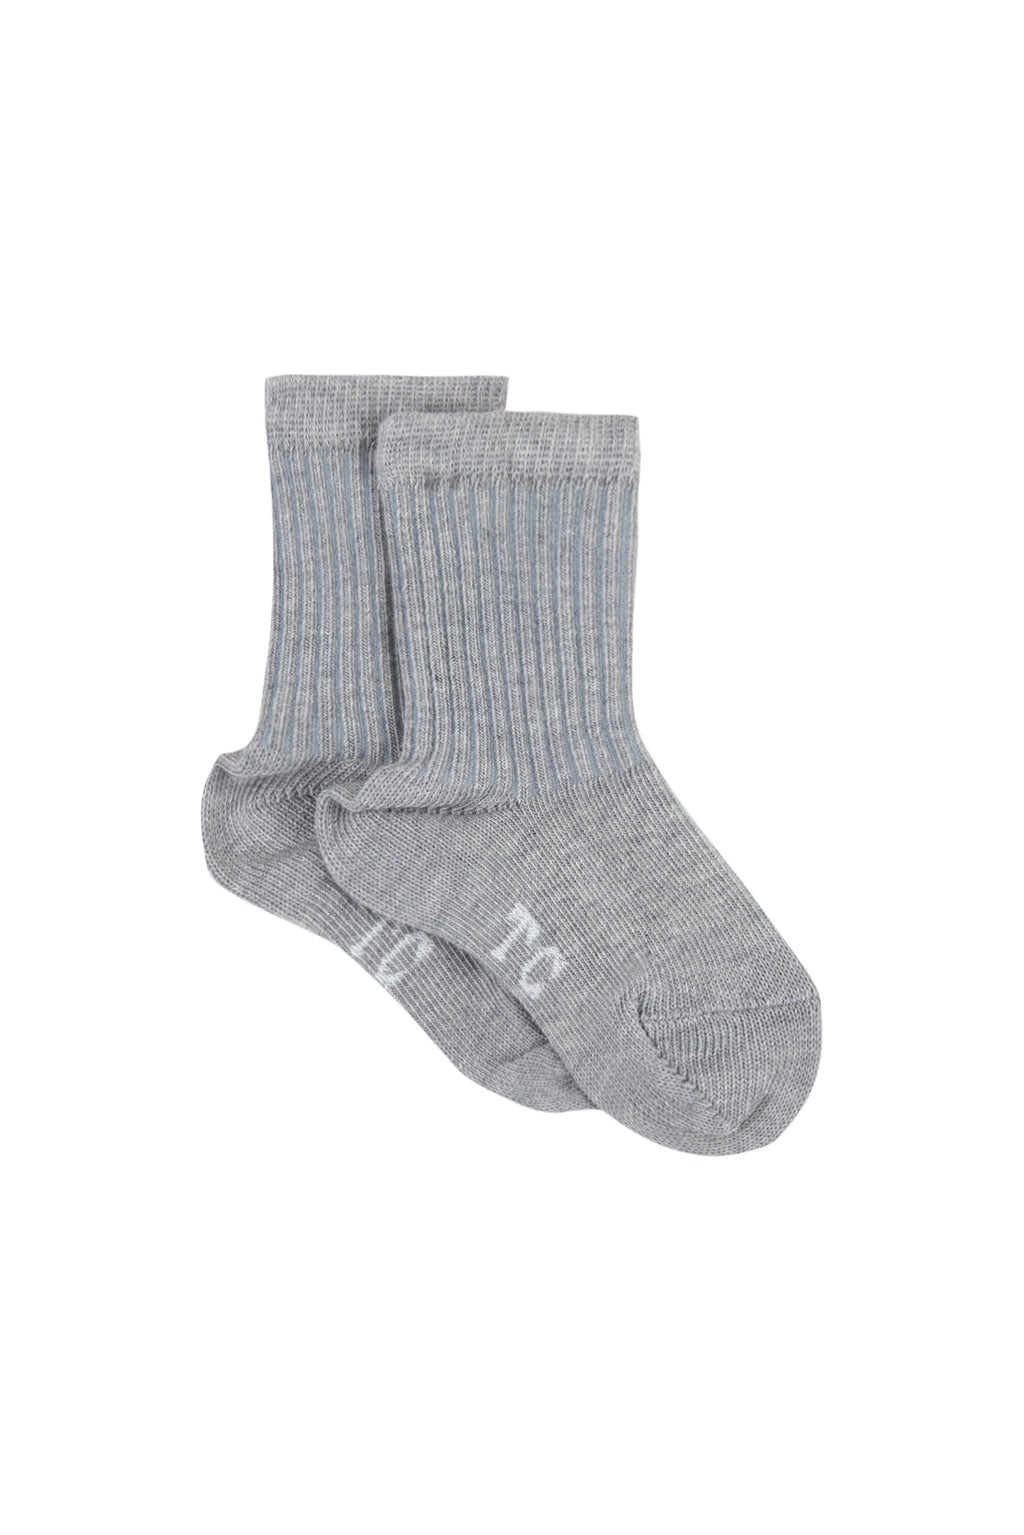 Chausettes - Grey cotton